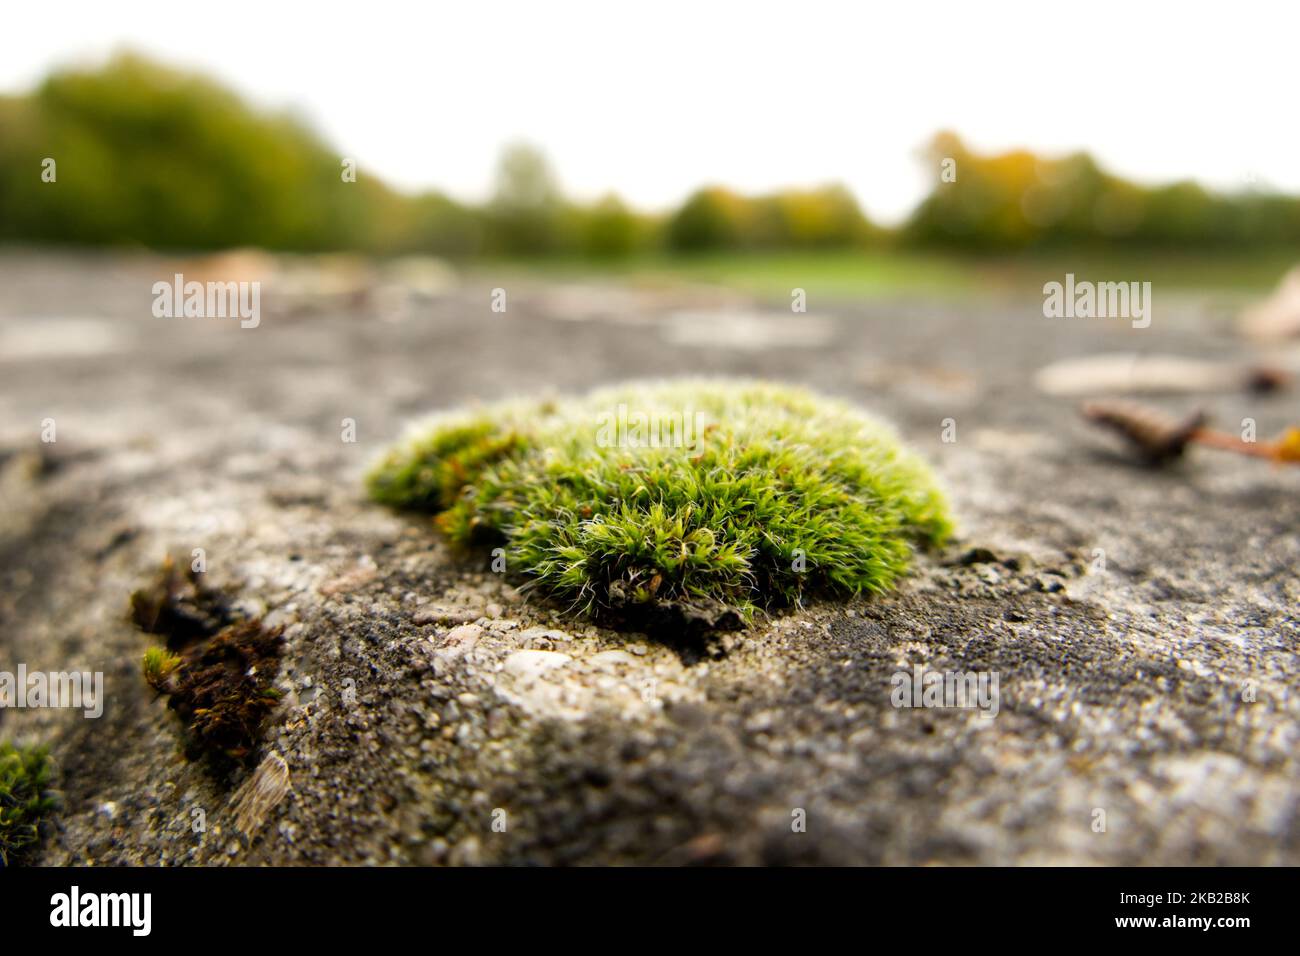 A small patch of moss growing on a weathered concrete wall, with bokeh trees in the background. Stock Photo